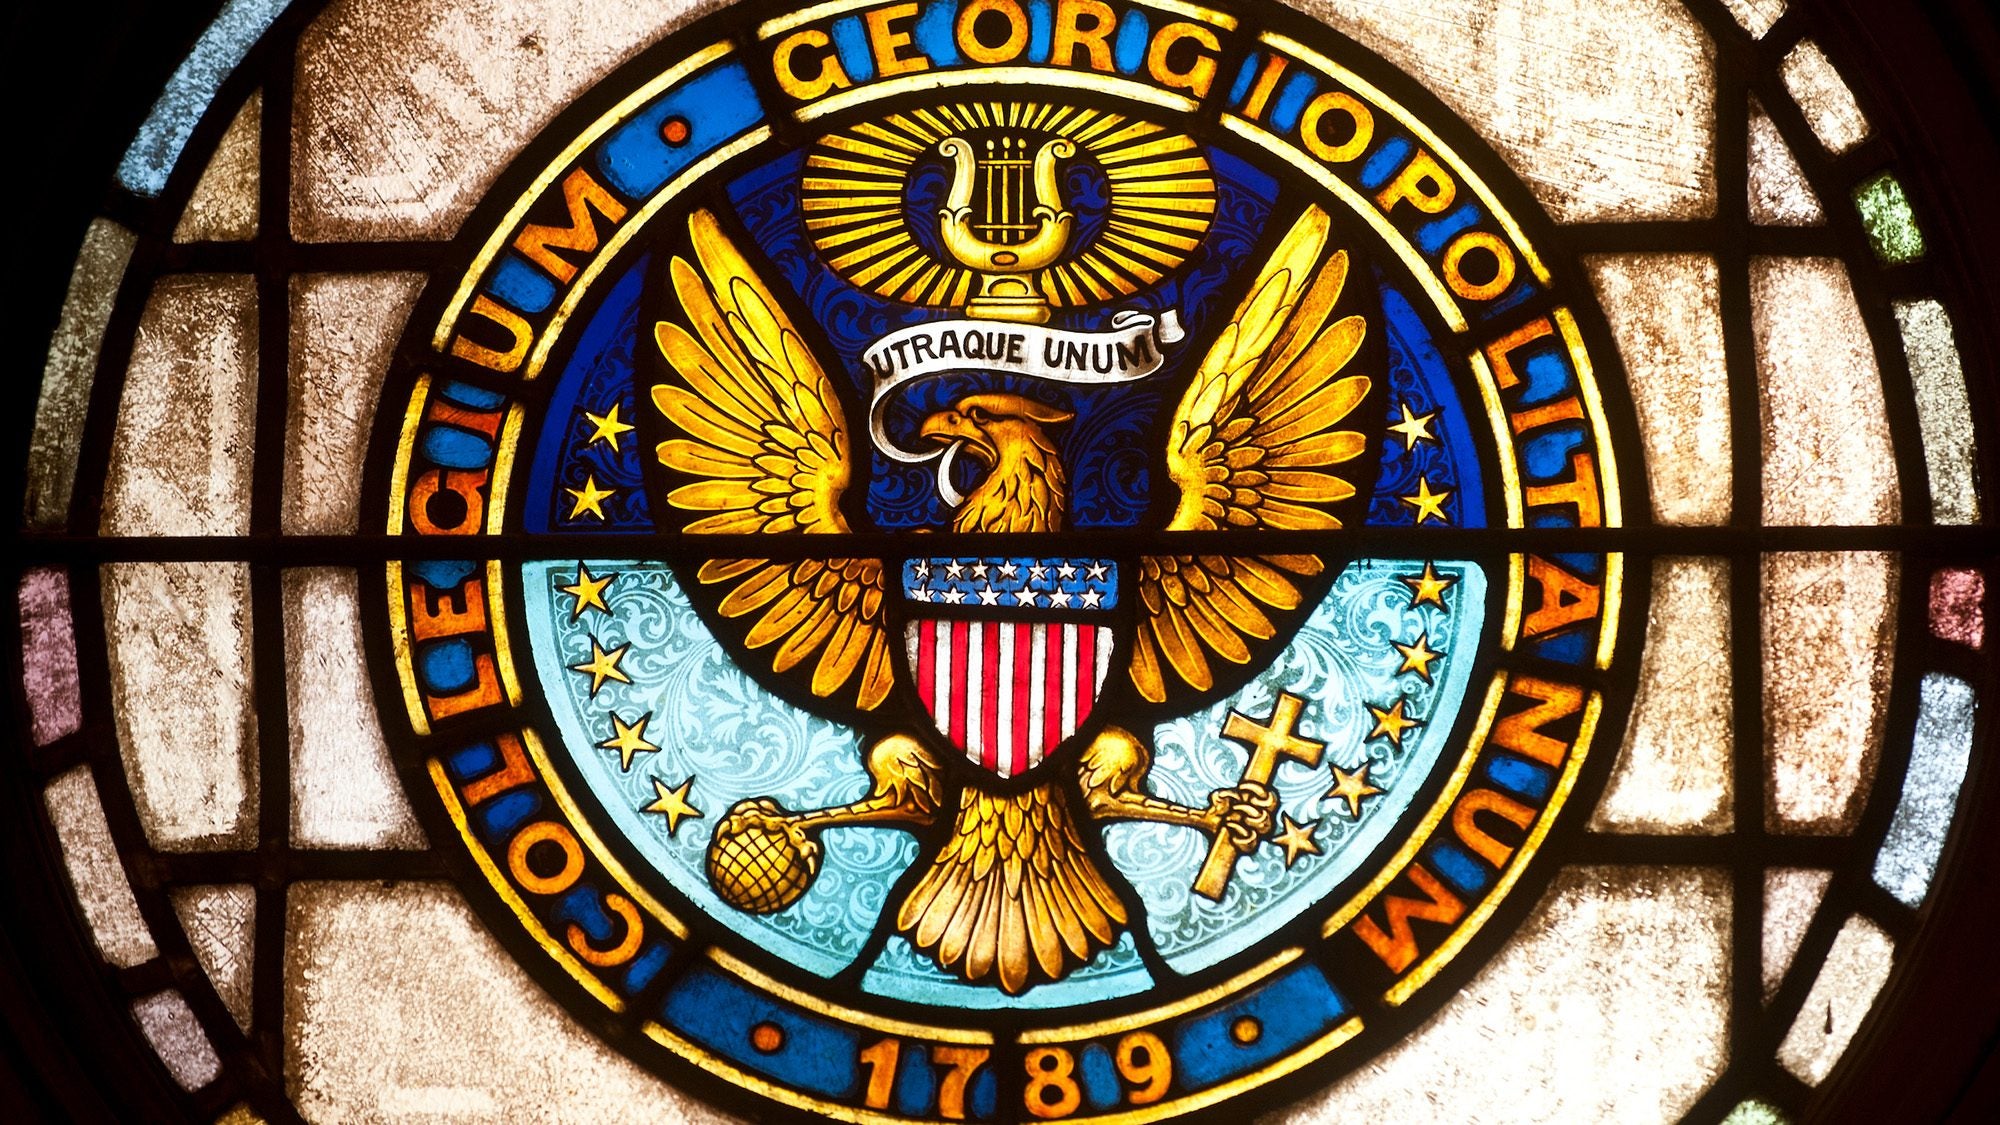 The Georgetown seal rendered in stained glass